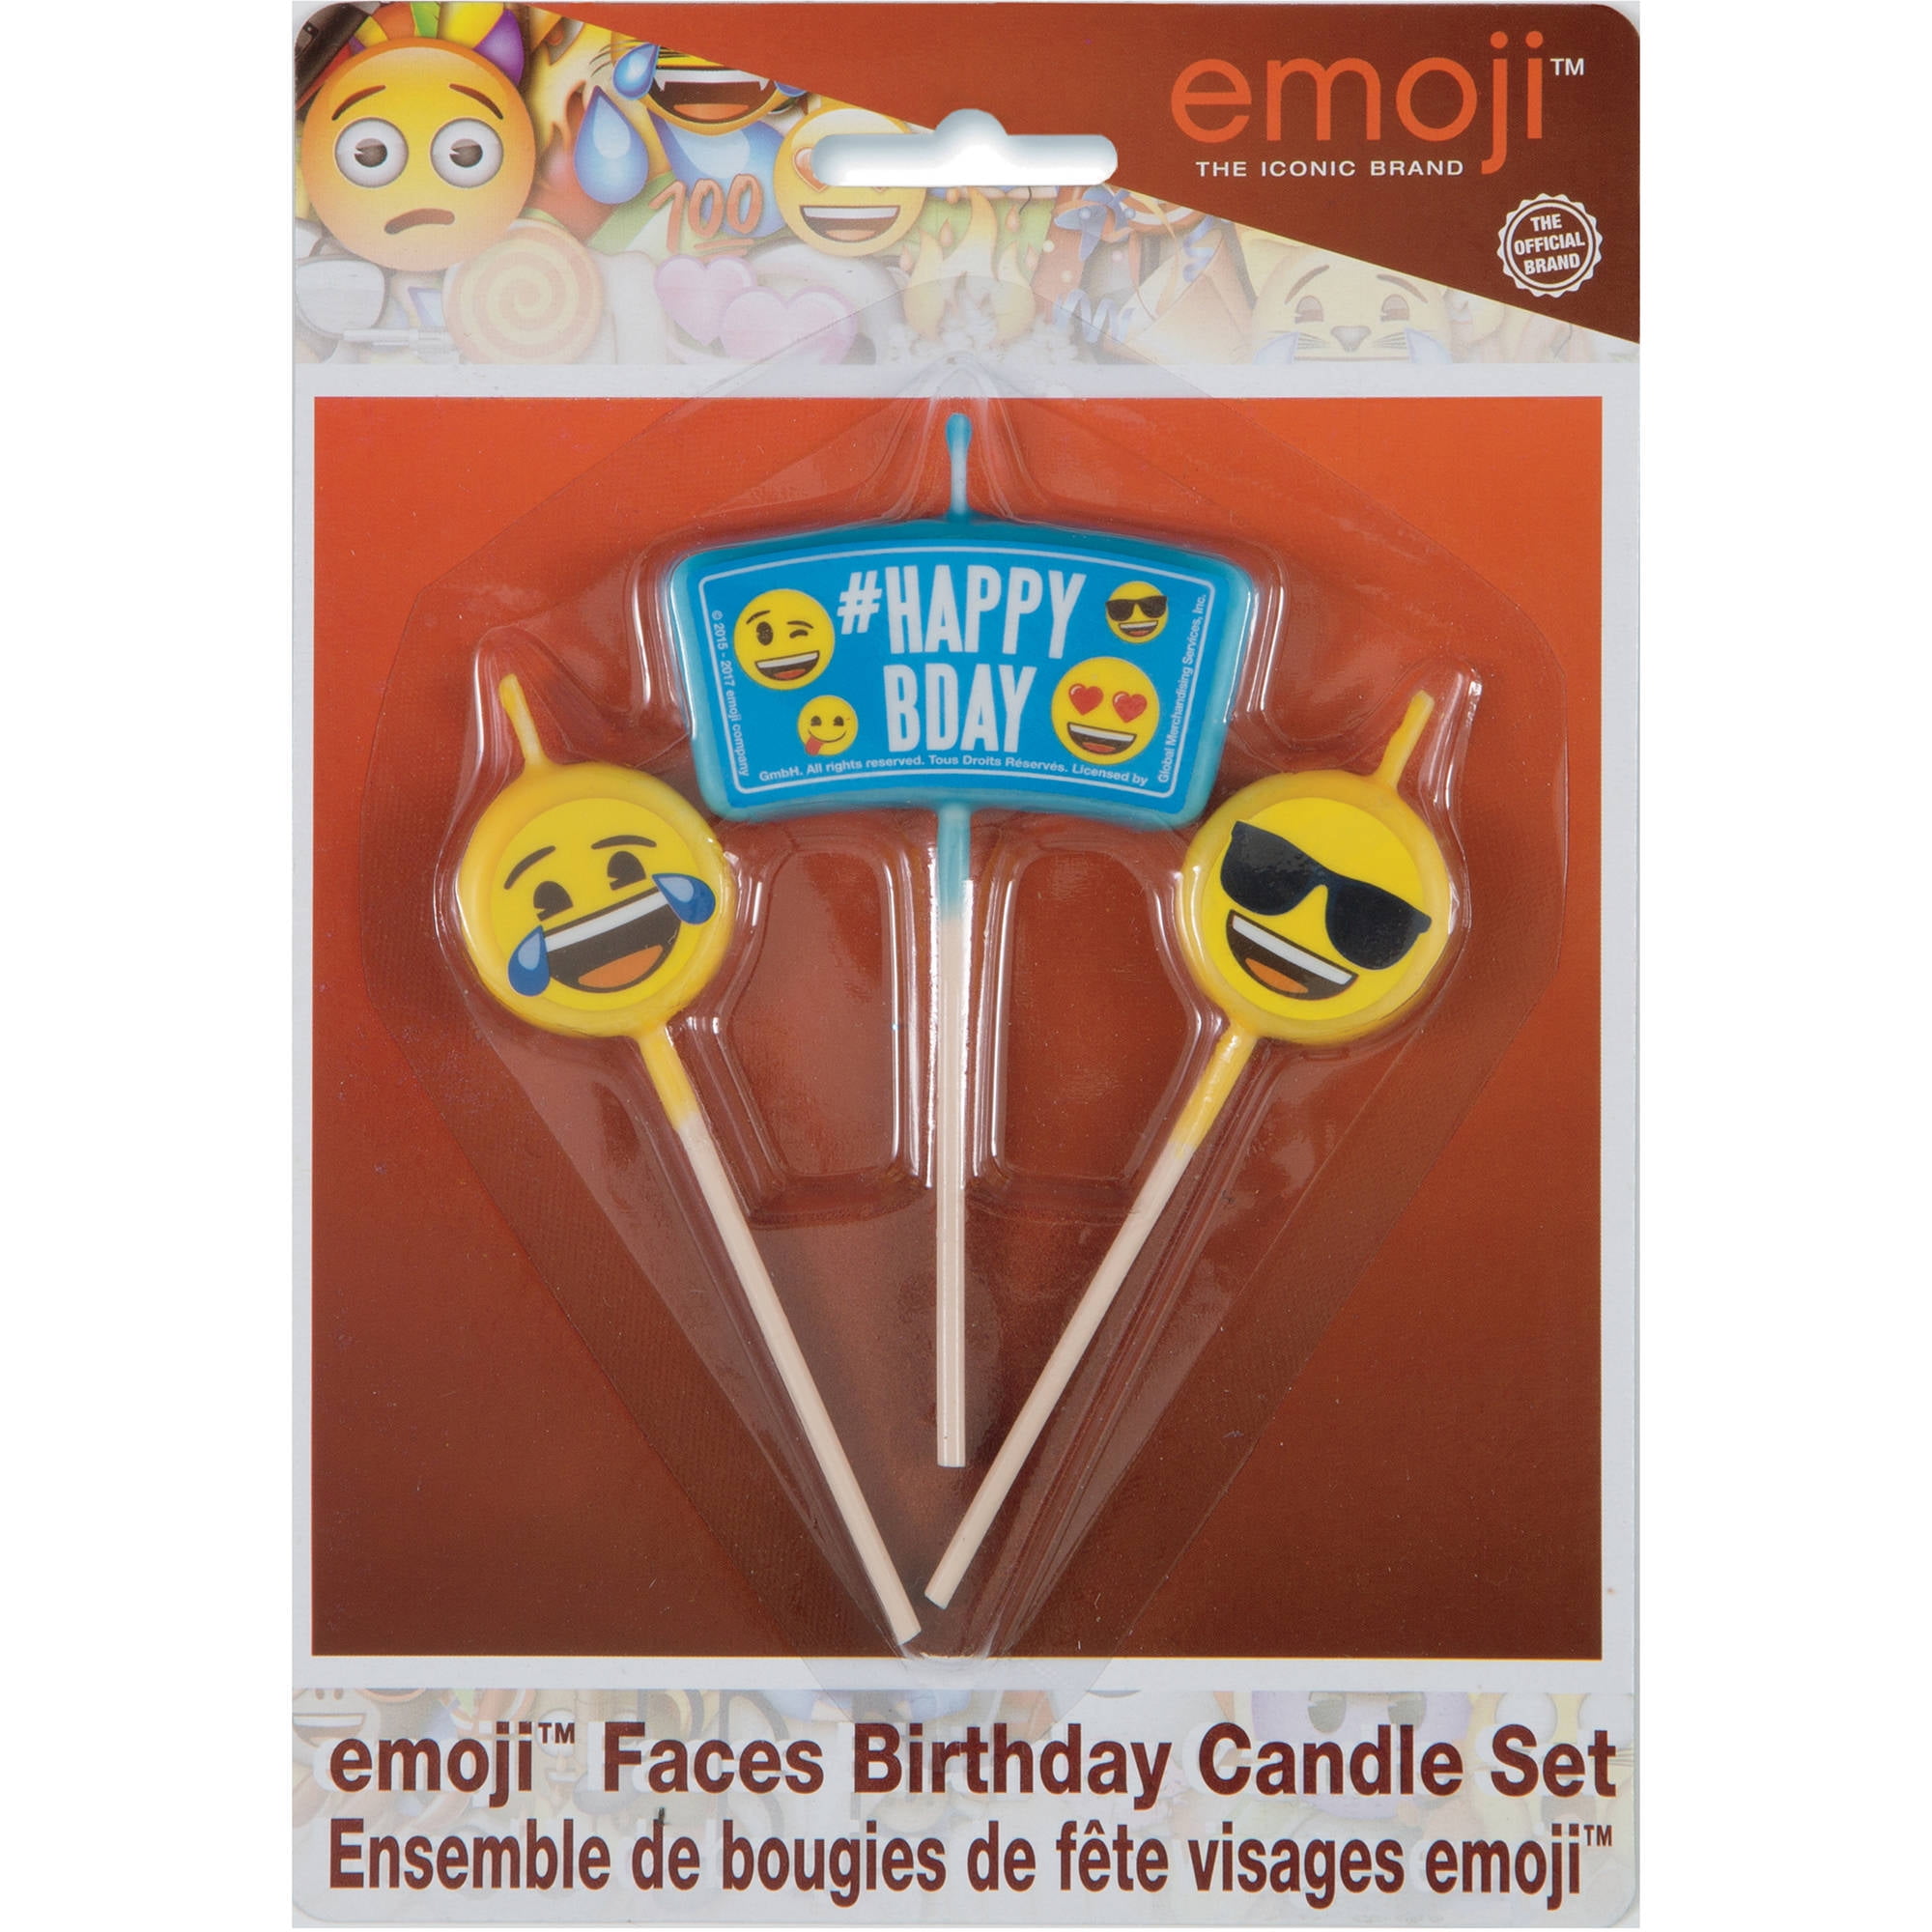 Pack of 4 Candles Get Emojinal NPW Emoticon Birthday Cake Candles 